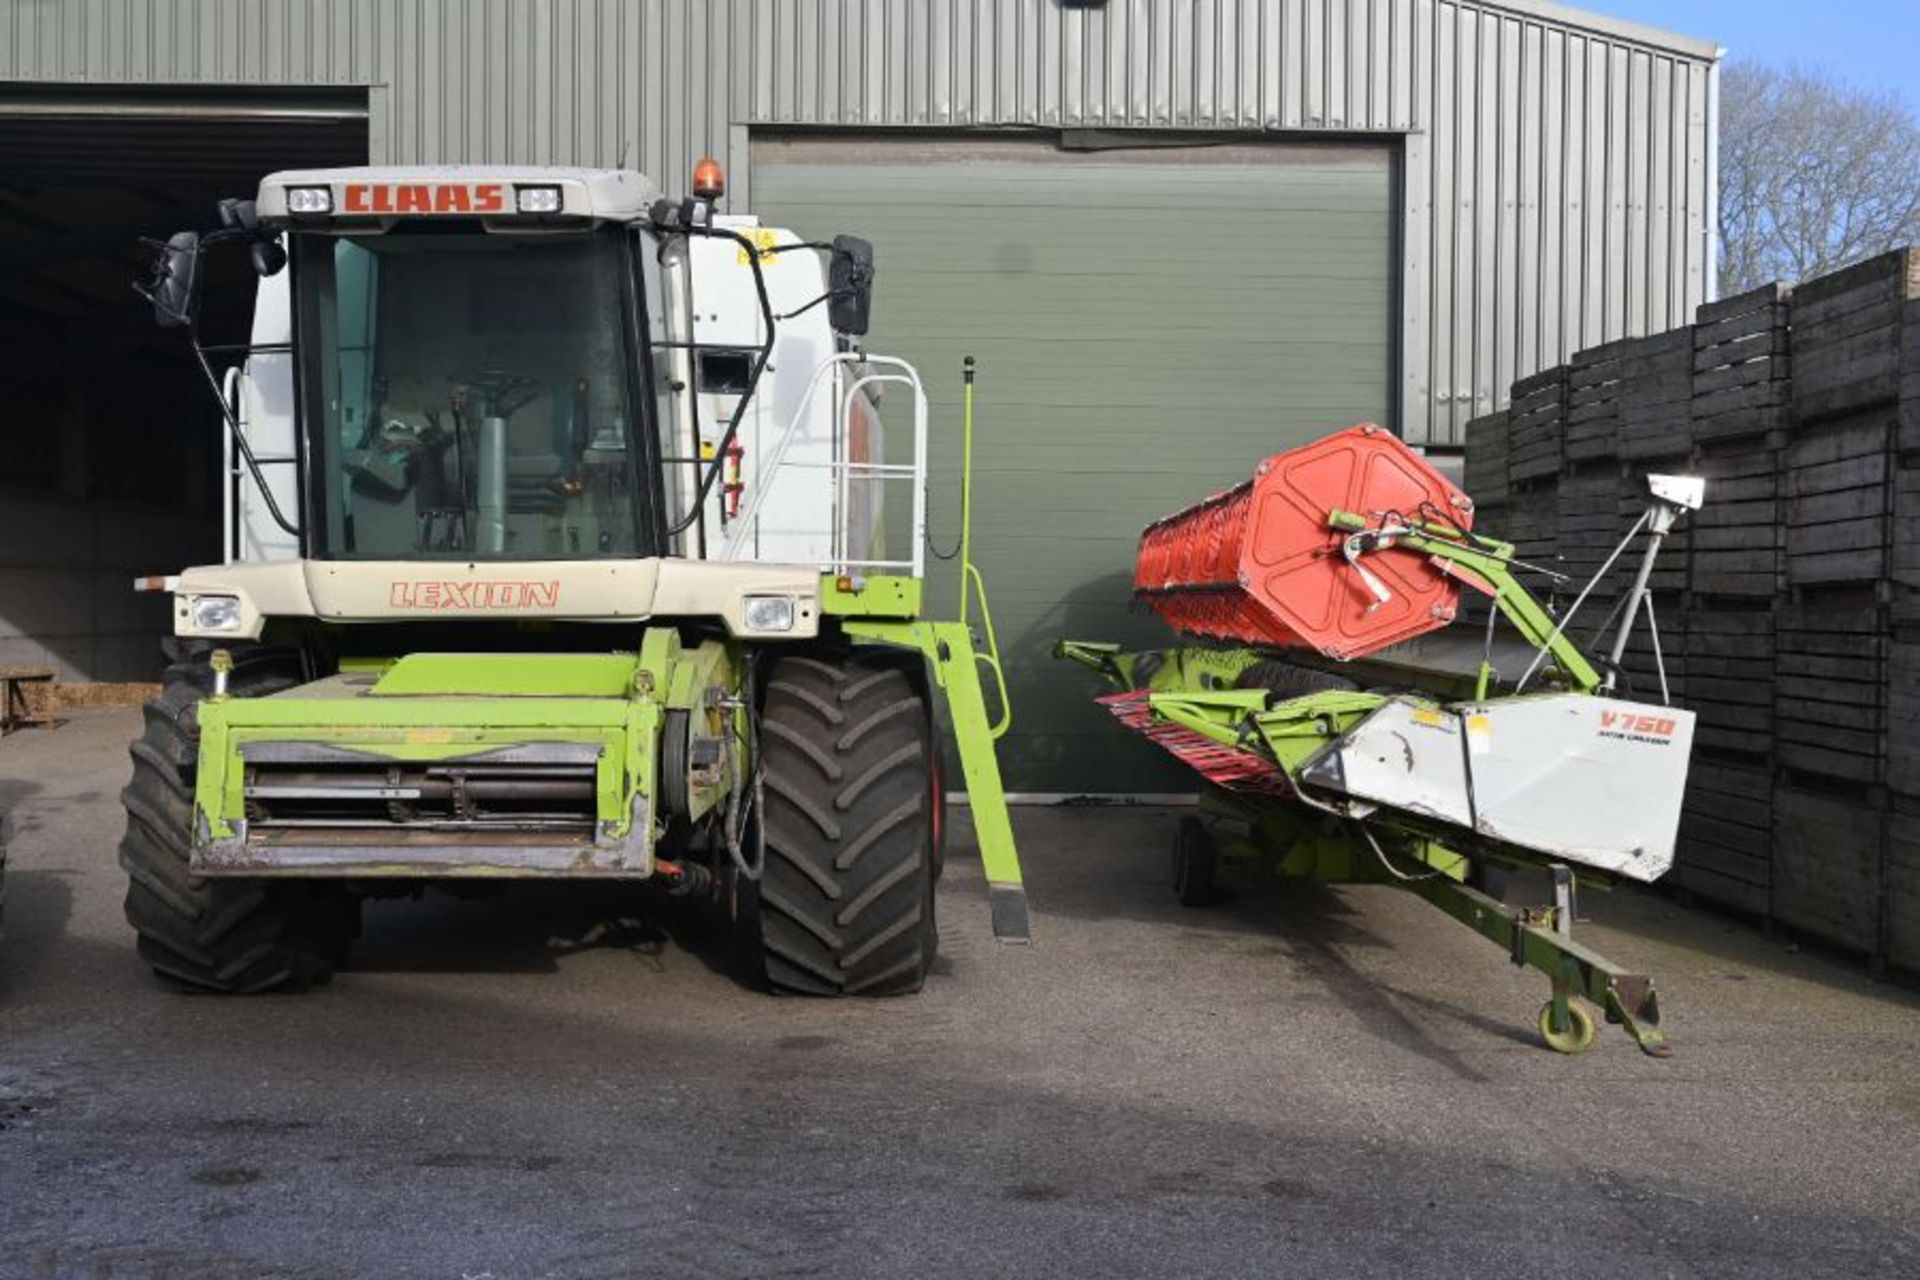 Claas Lexion 480 combine Y383 0DX / 3658 hours with a V750 auto header and header trailer - Bild 9 aus 27